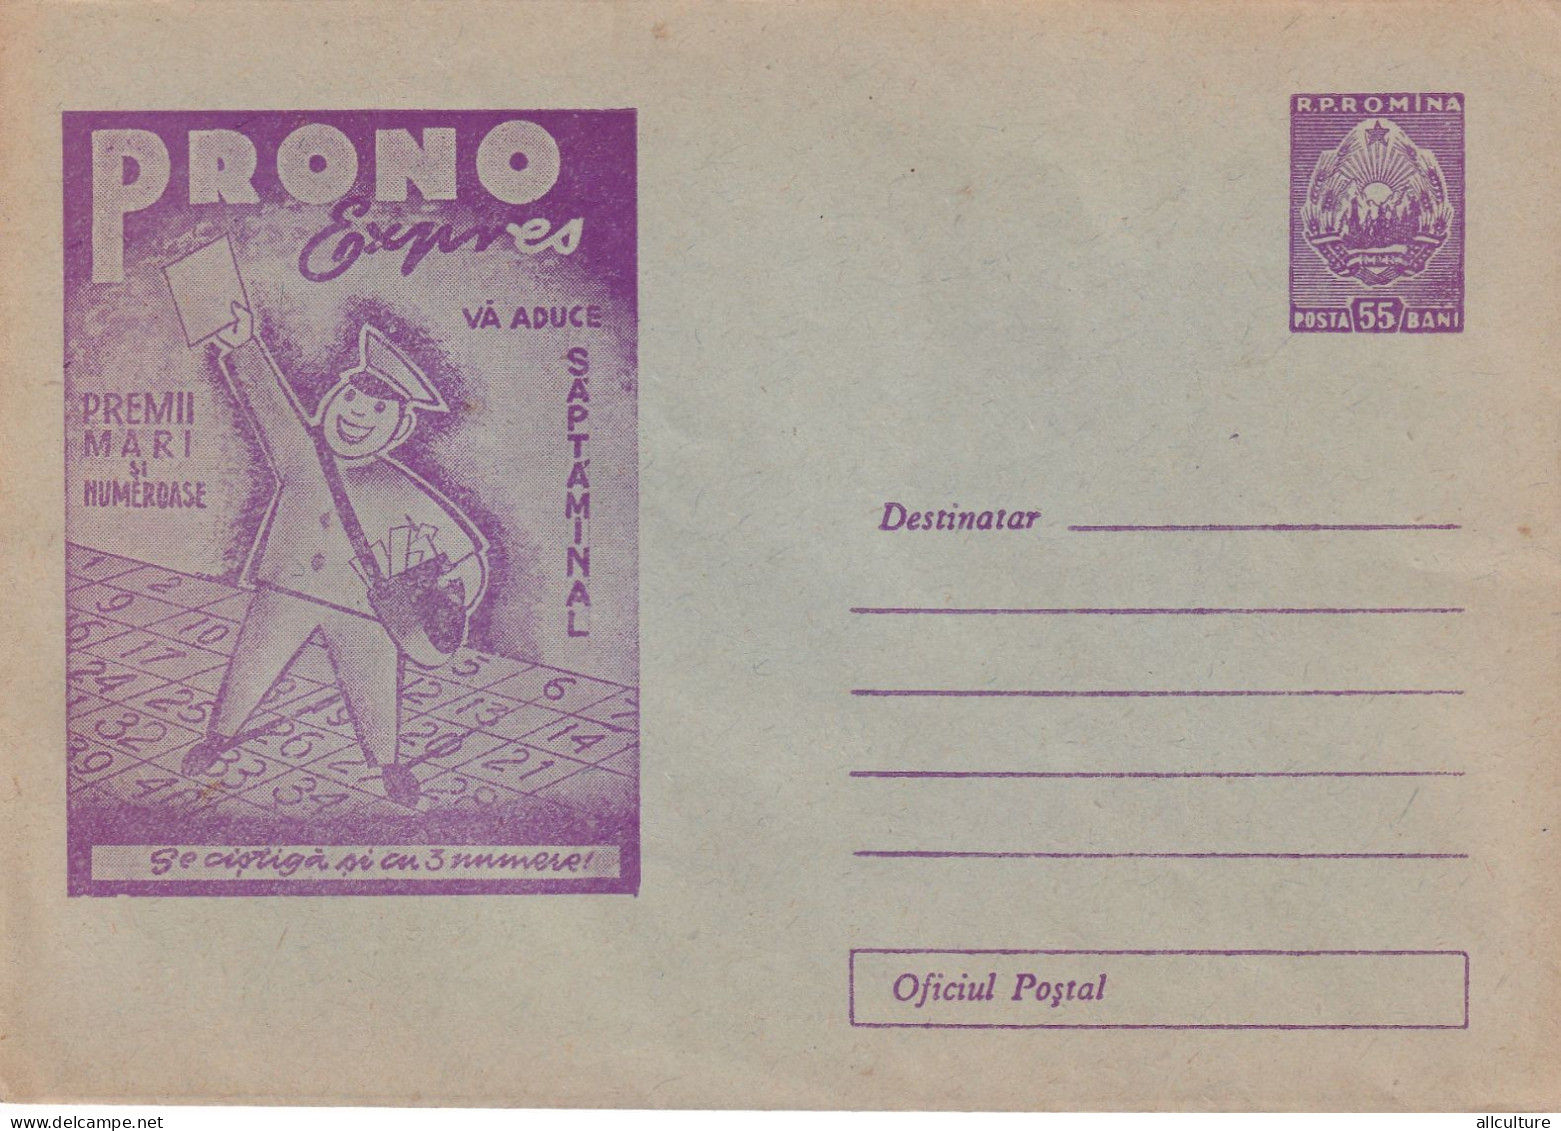 A24613 - PRONO EXPRES LUCK GAME  LOTTO, VAGER, PETING, COVER STATIONERY,  1960  Romania - Enteros Postales